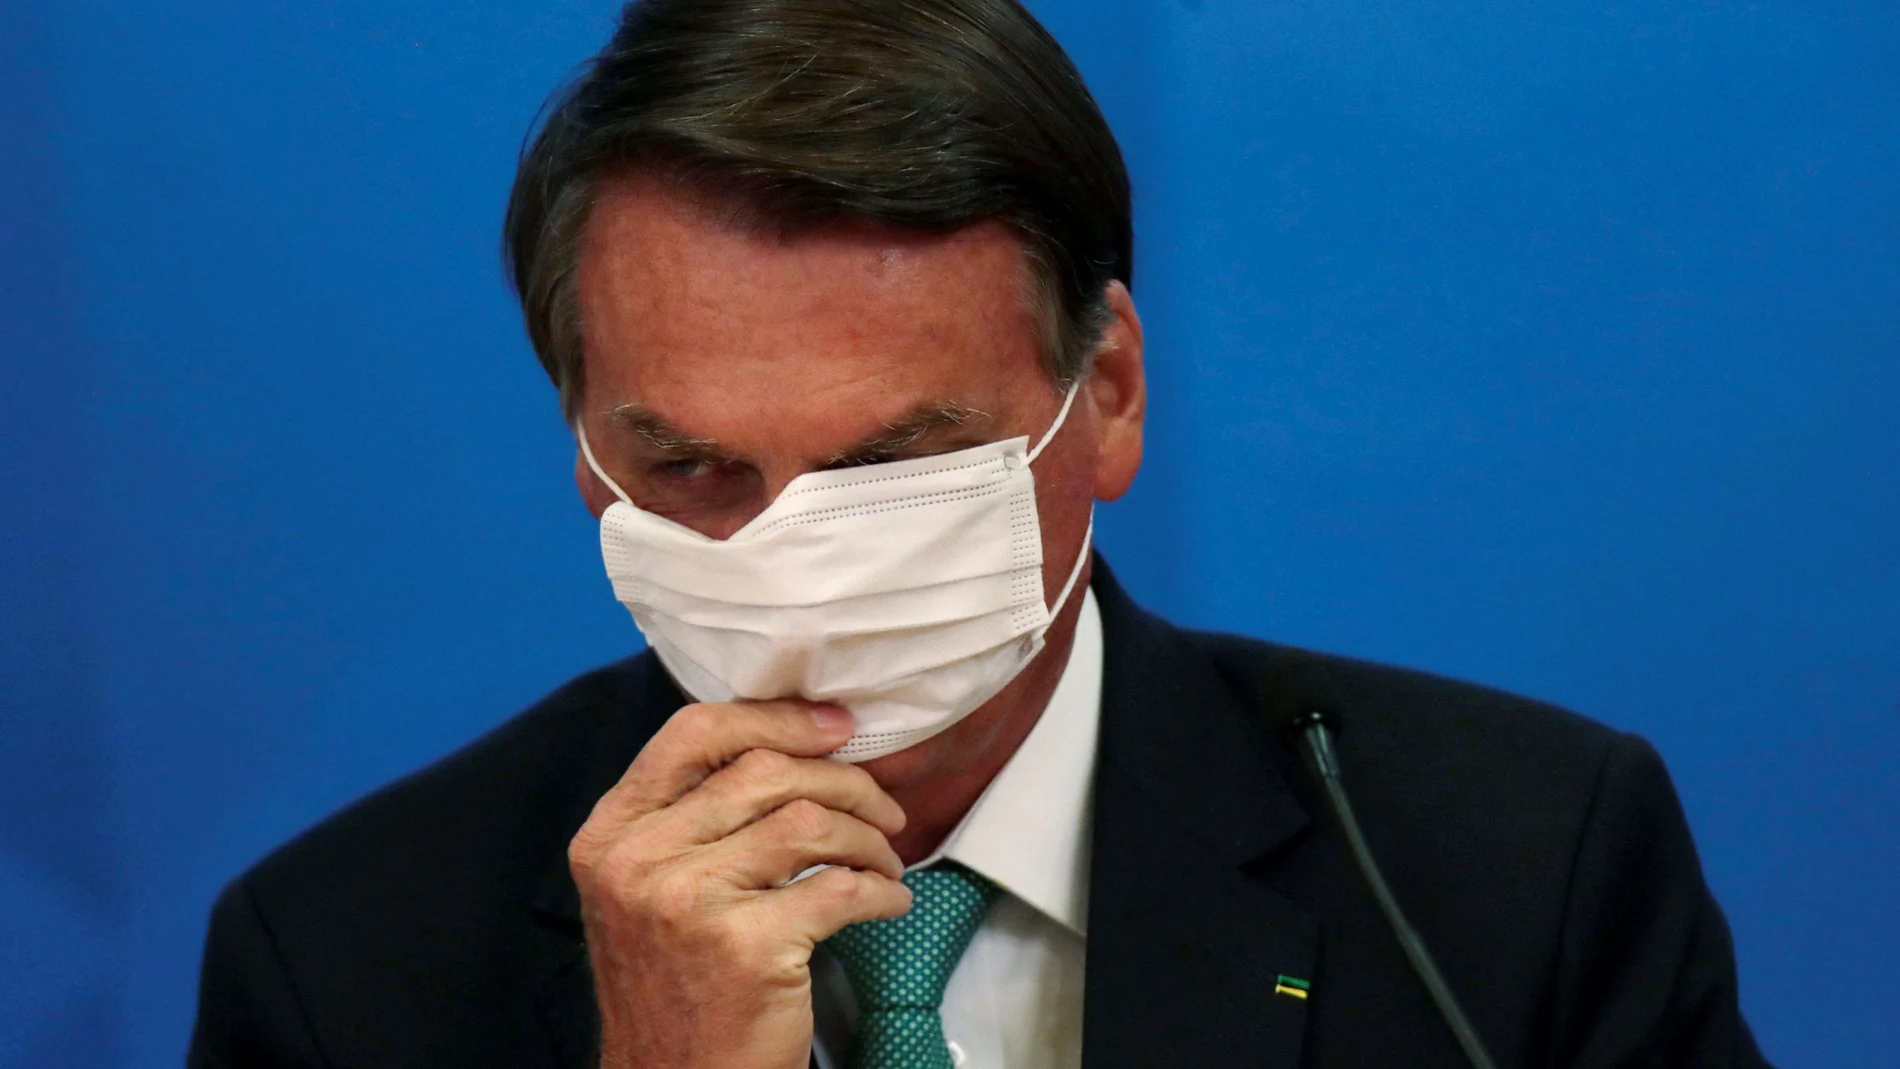 FILE PHOTO: Brazil's President Jair Bolsonaro adjusts his protective face mask during a ceremony of signing the Vaccine Technology Transfer Agreement for Oxford/AstraZeneca coronavirus disease (COVID-19) vaccines, in Brasilia, Brazil, June 1, 2021. REUTERS/Ueslei Marcelino/File Photo